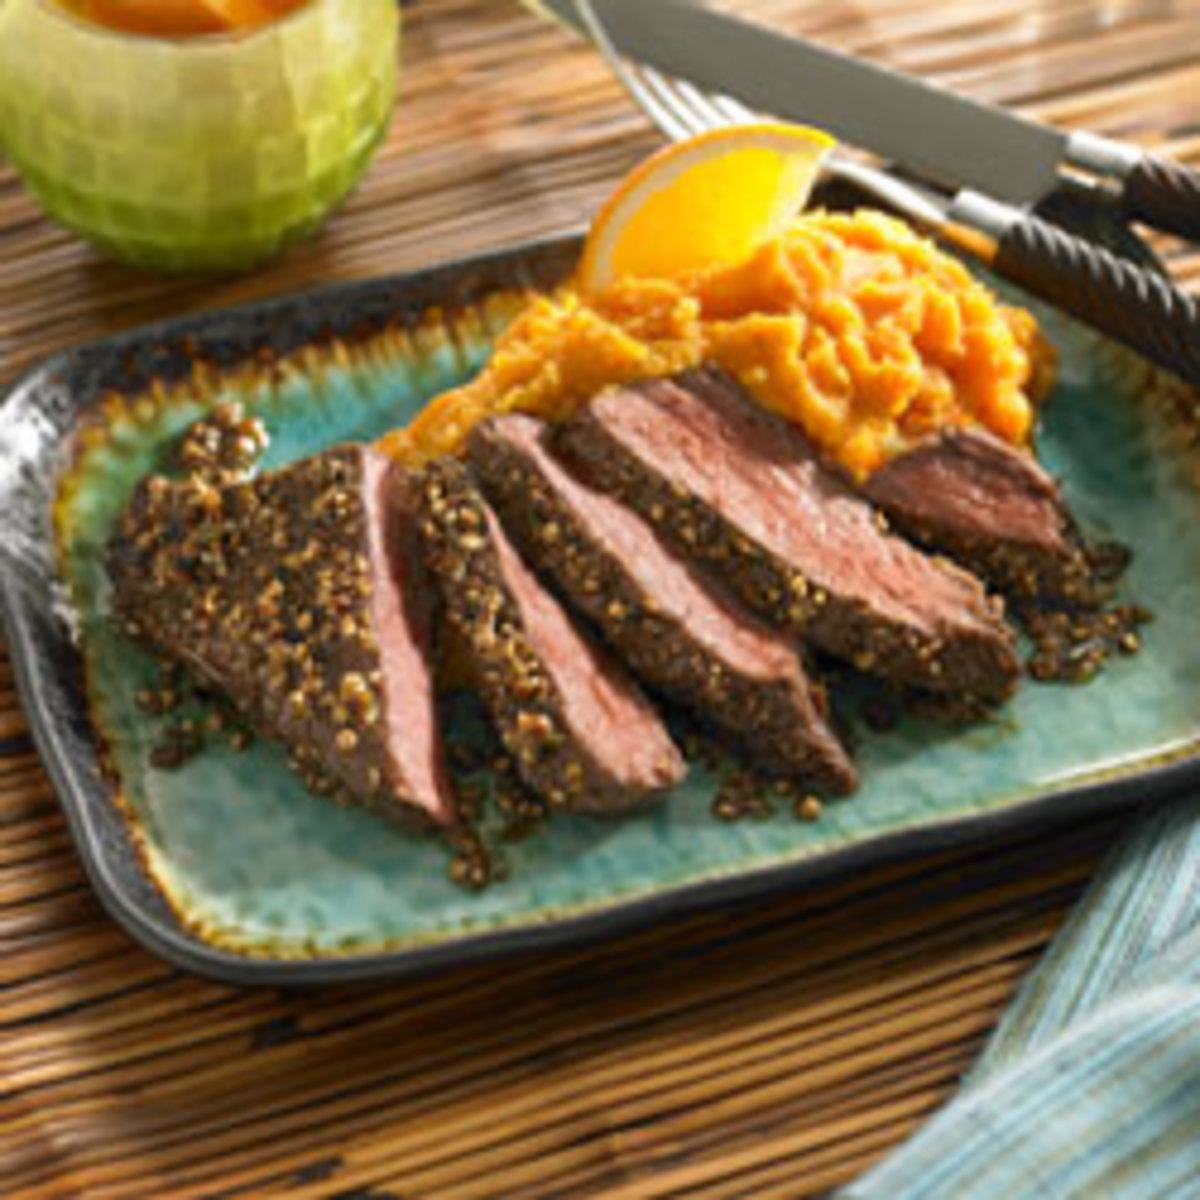 Citrus Beef Steak “Cuban Style” with Mashed Sweet Potatoes